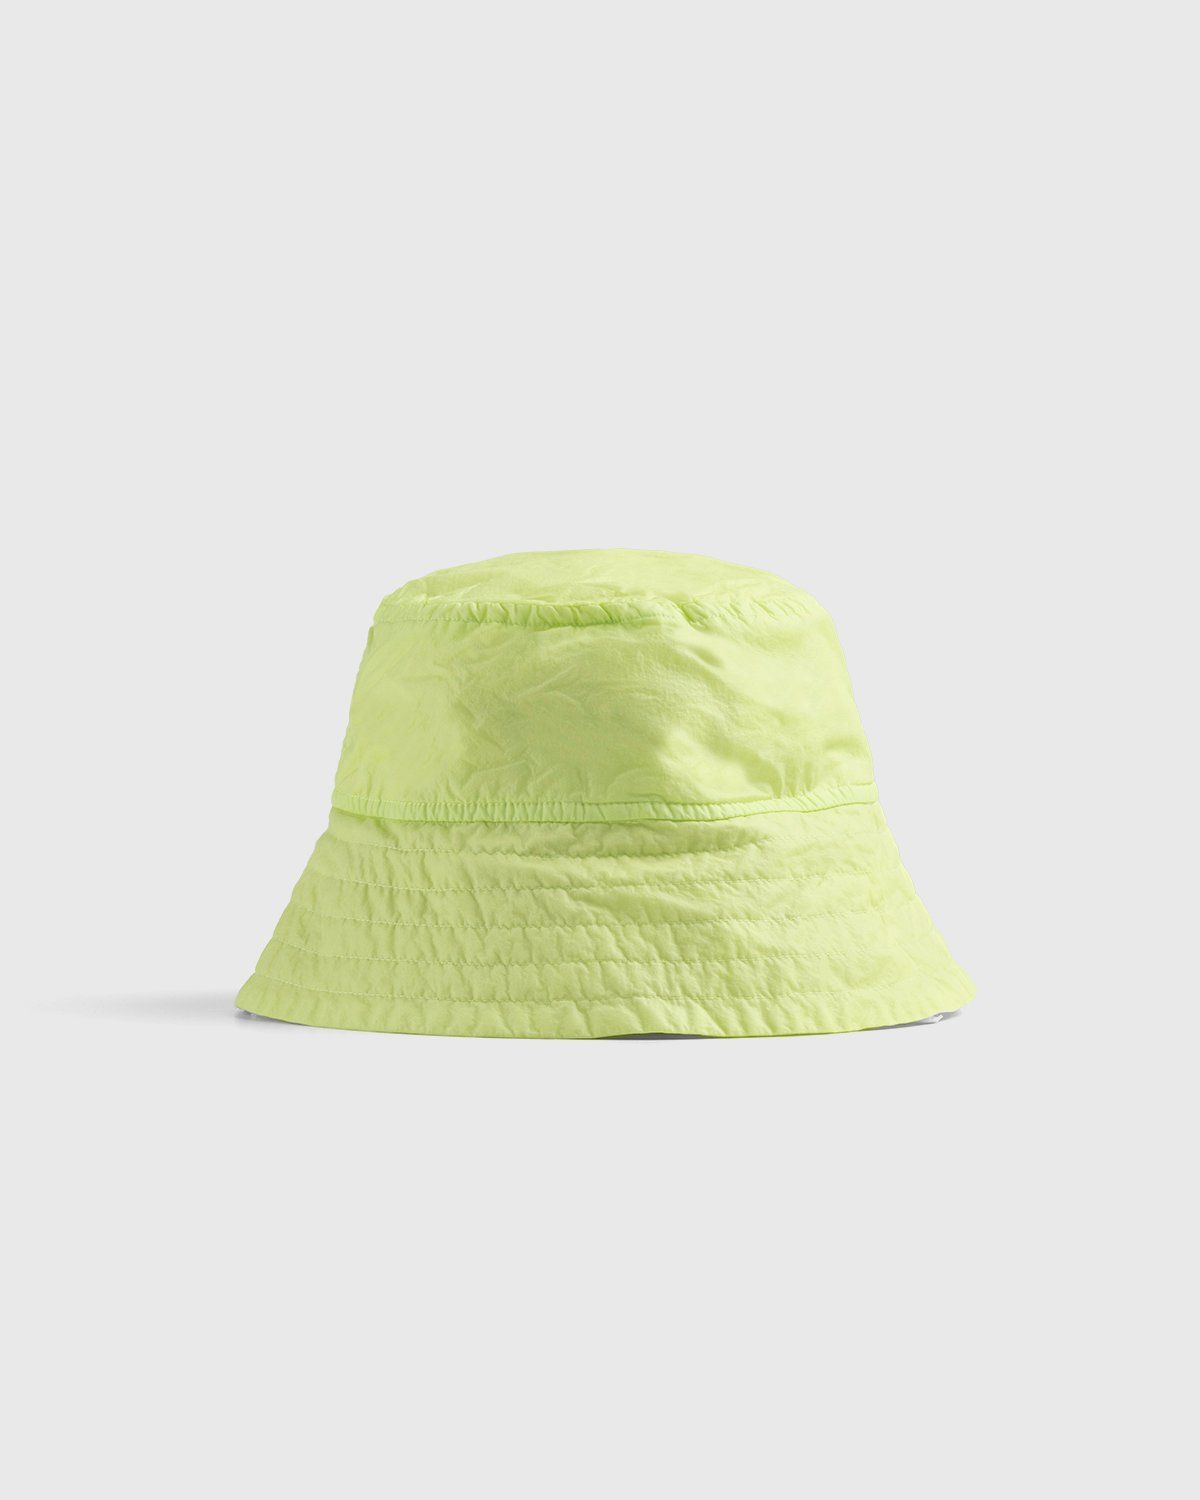 Dries van Noten – Gilly Hat Lime - Hats - Yellow - Image 2